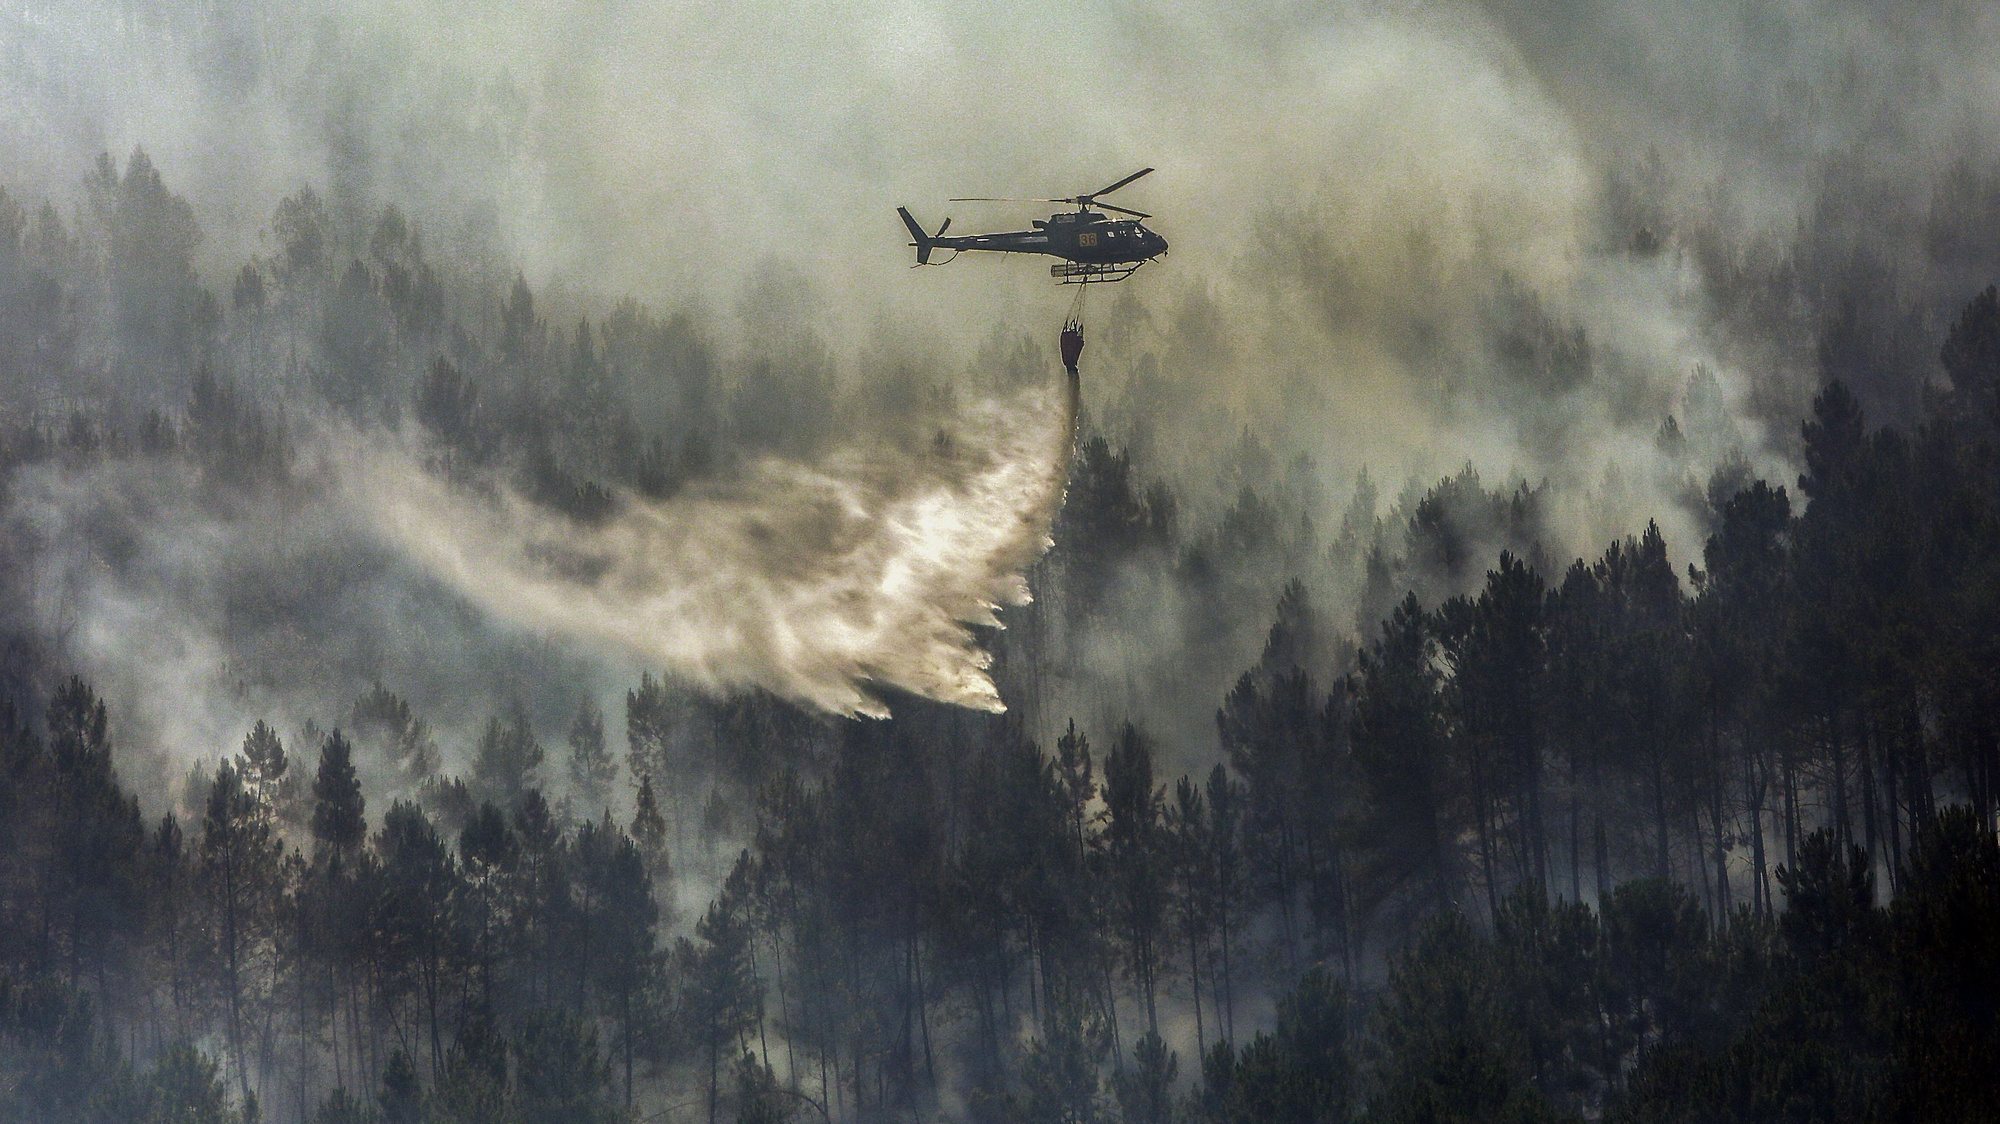 An helicopter drops water over a forest fire in the Beijames glacial valley, Covilha, Castelo Branco, Portugal, 09 August 2022. 580 operational, 205 vehicles and 13 airplane are fighting the forest fire. MIGUEL PEREIRA DA SILVA/LUSA